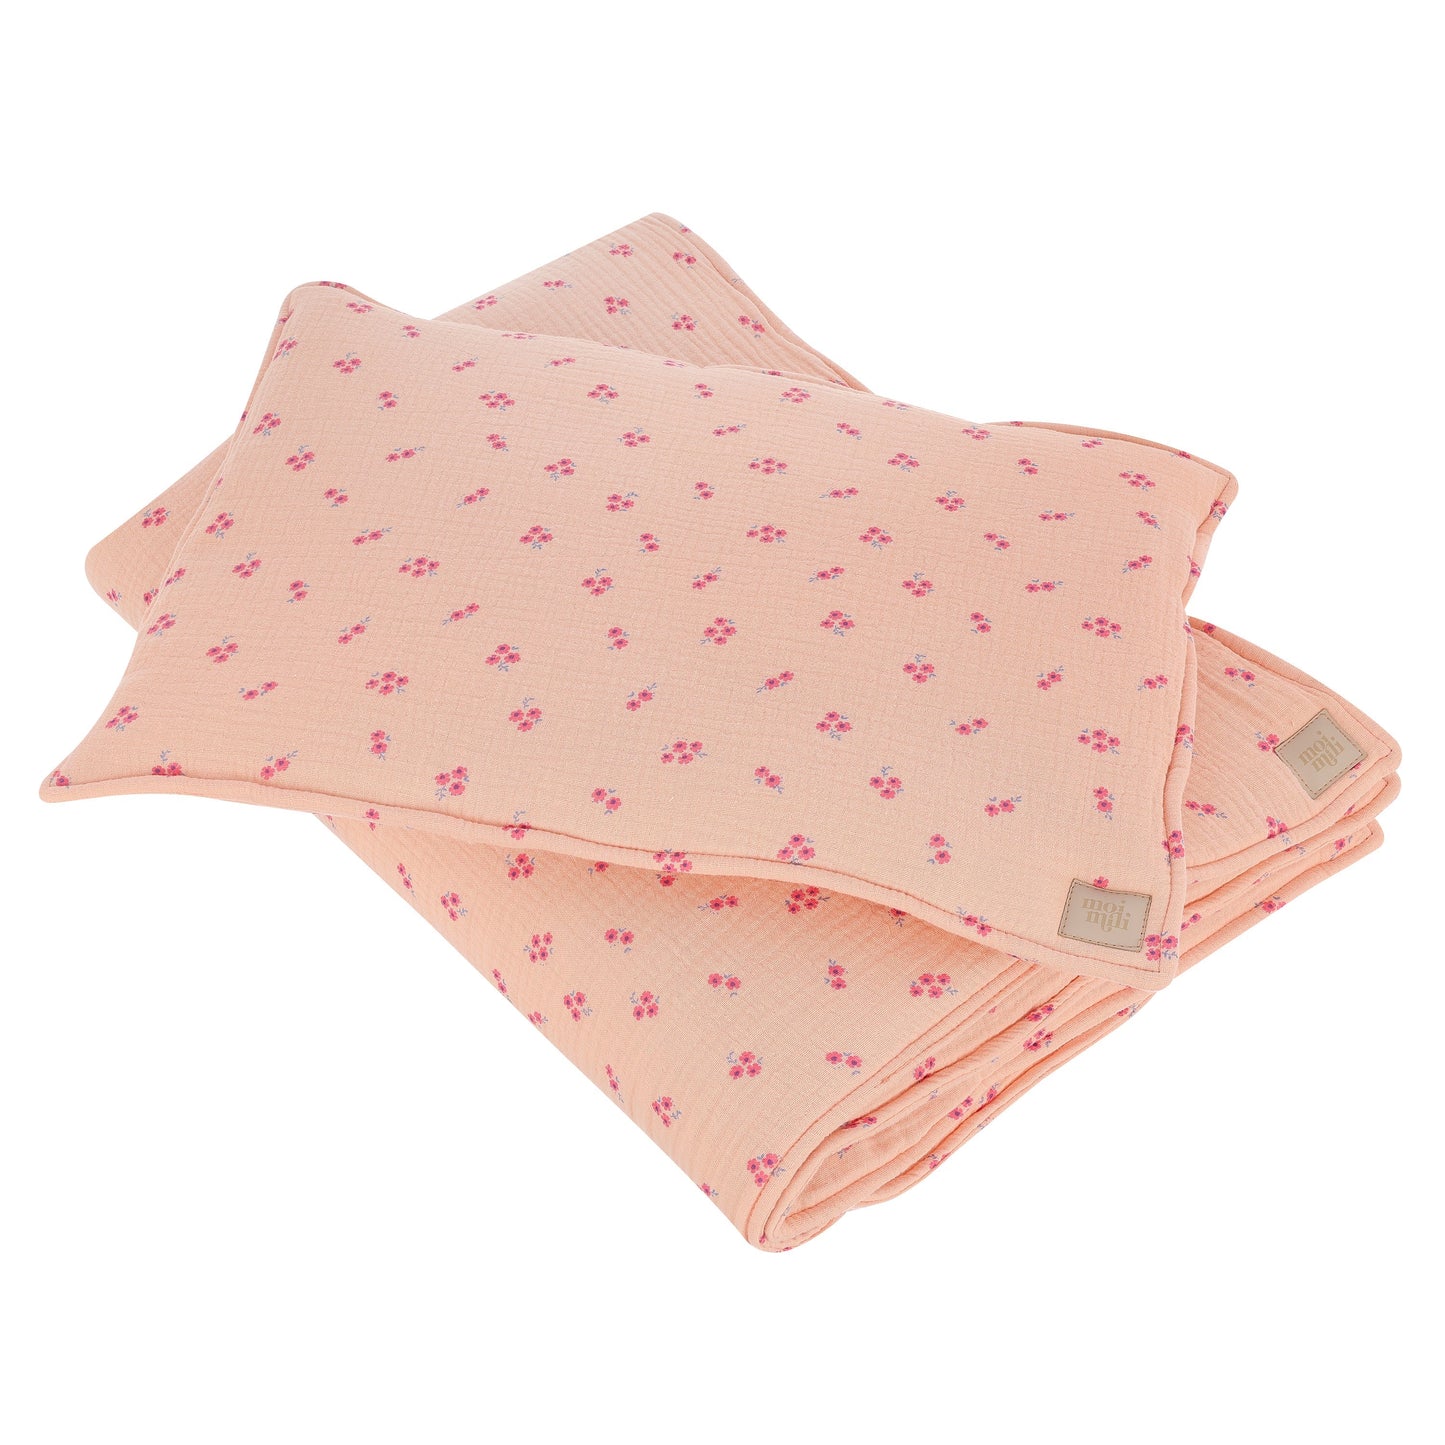 Muslin "Pink forget-me-not" Child Cover Set by Moi Mili